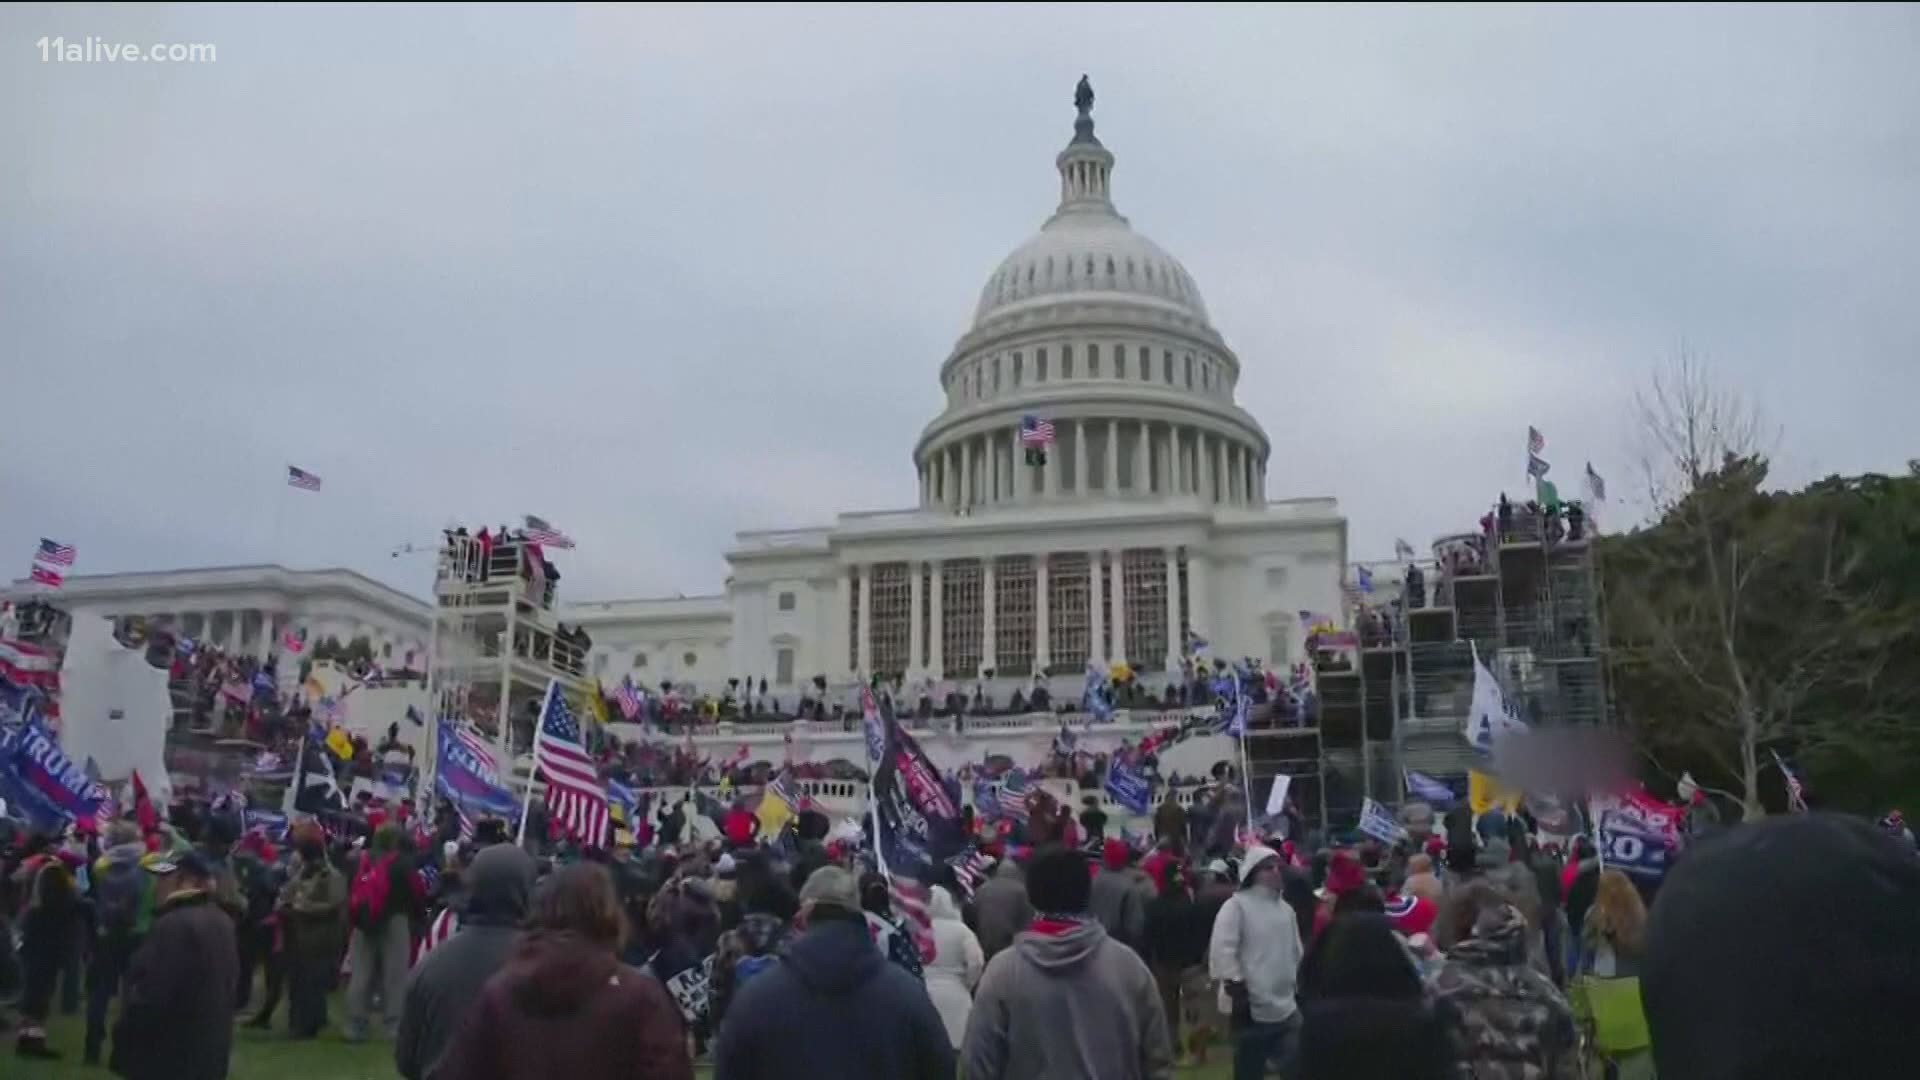 The suggestion from many: if the people who stormed the Capitol were part of a minority group, the response from authorities may have been different.